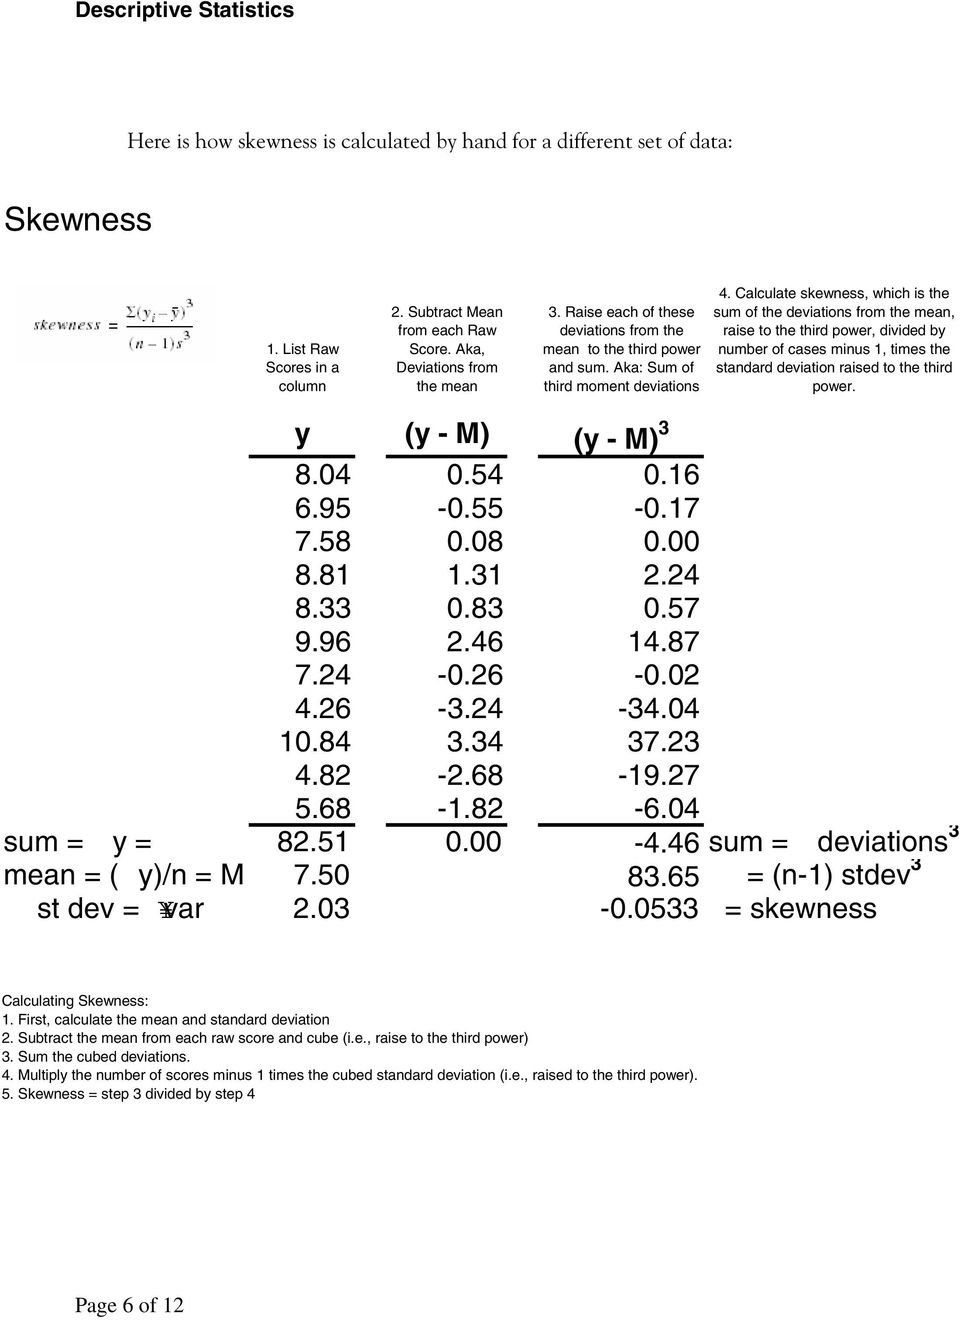 Calculate skewness, which is the sum of the deviations from the mean, raise to the third power, divided by number of cases minus 1, times the standard deviation raised to the third power.